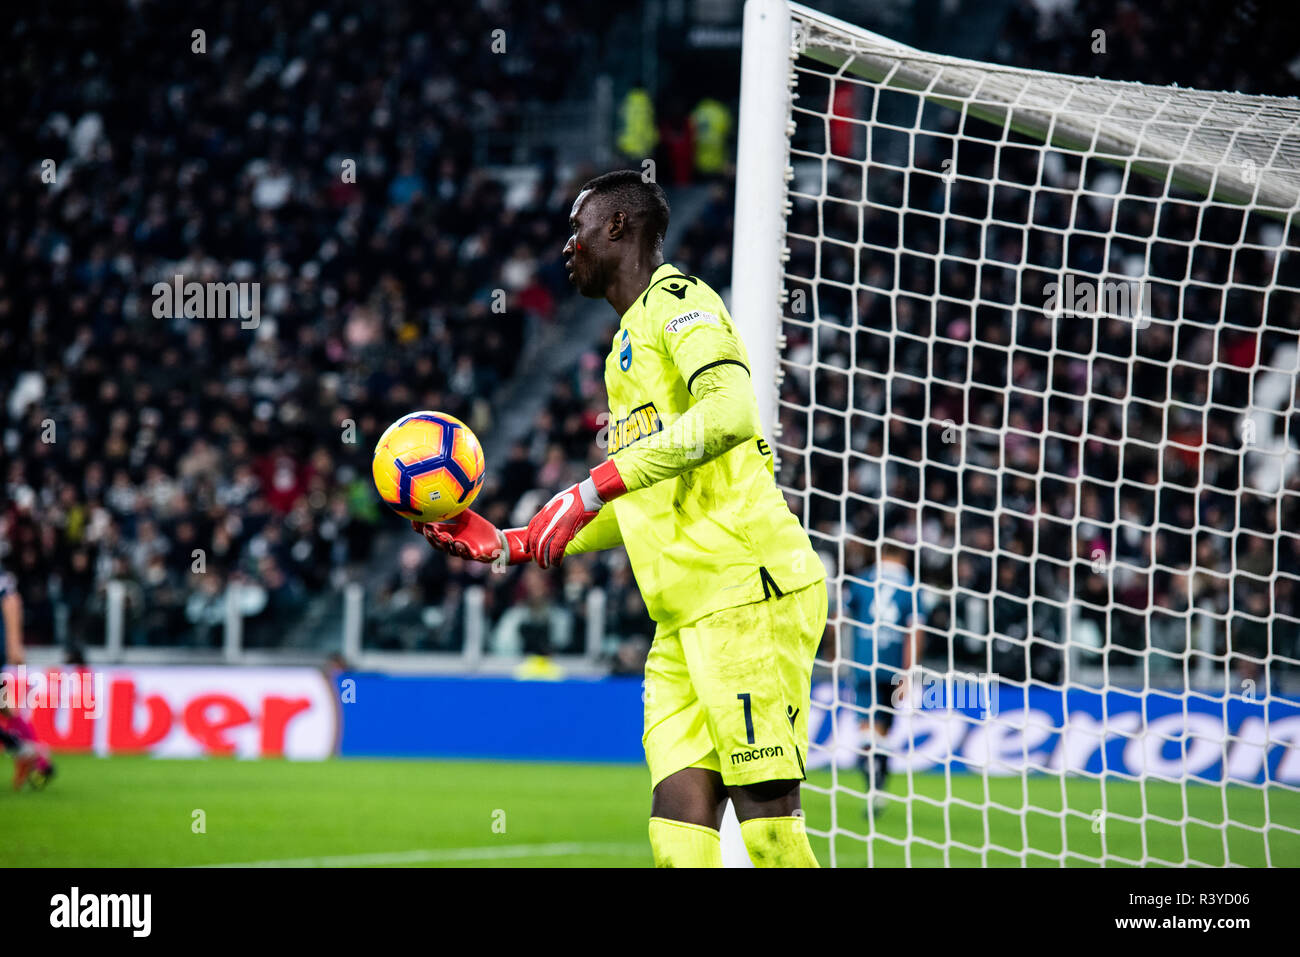 Turin, Italy. 24th November 2018. Alfred Gomis of SPAL during the Serie  A Match Juventus vs SPAL. Juventus won 2-0 at Allianz Stadium, in Turin on 24th november 2018 Credit: Alberto Gandolfo/Alamy Live News Stock Photo